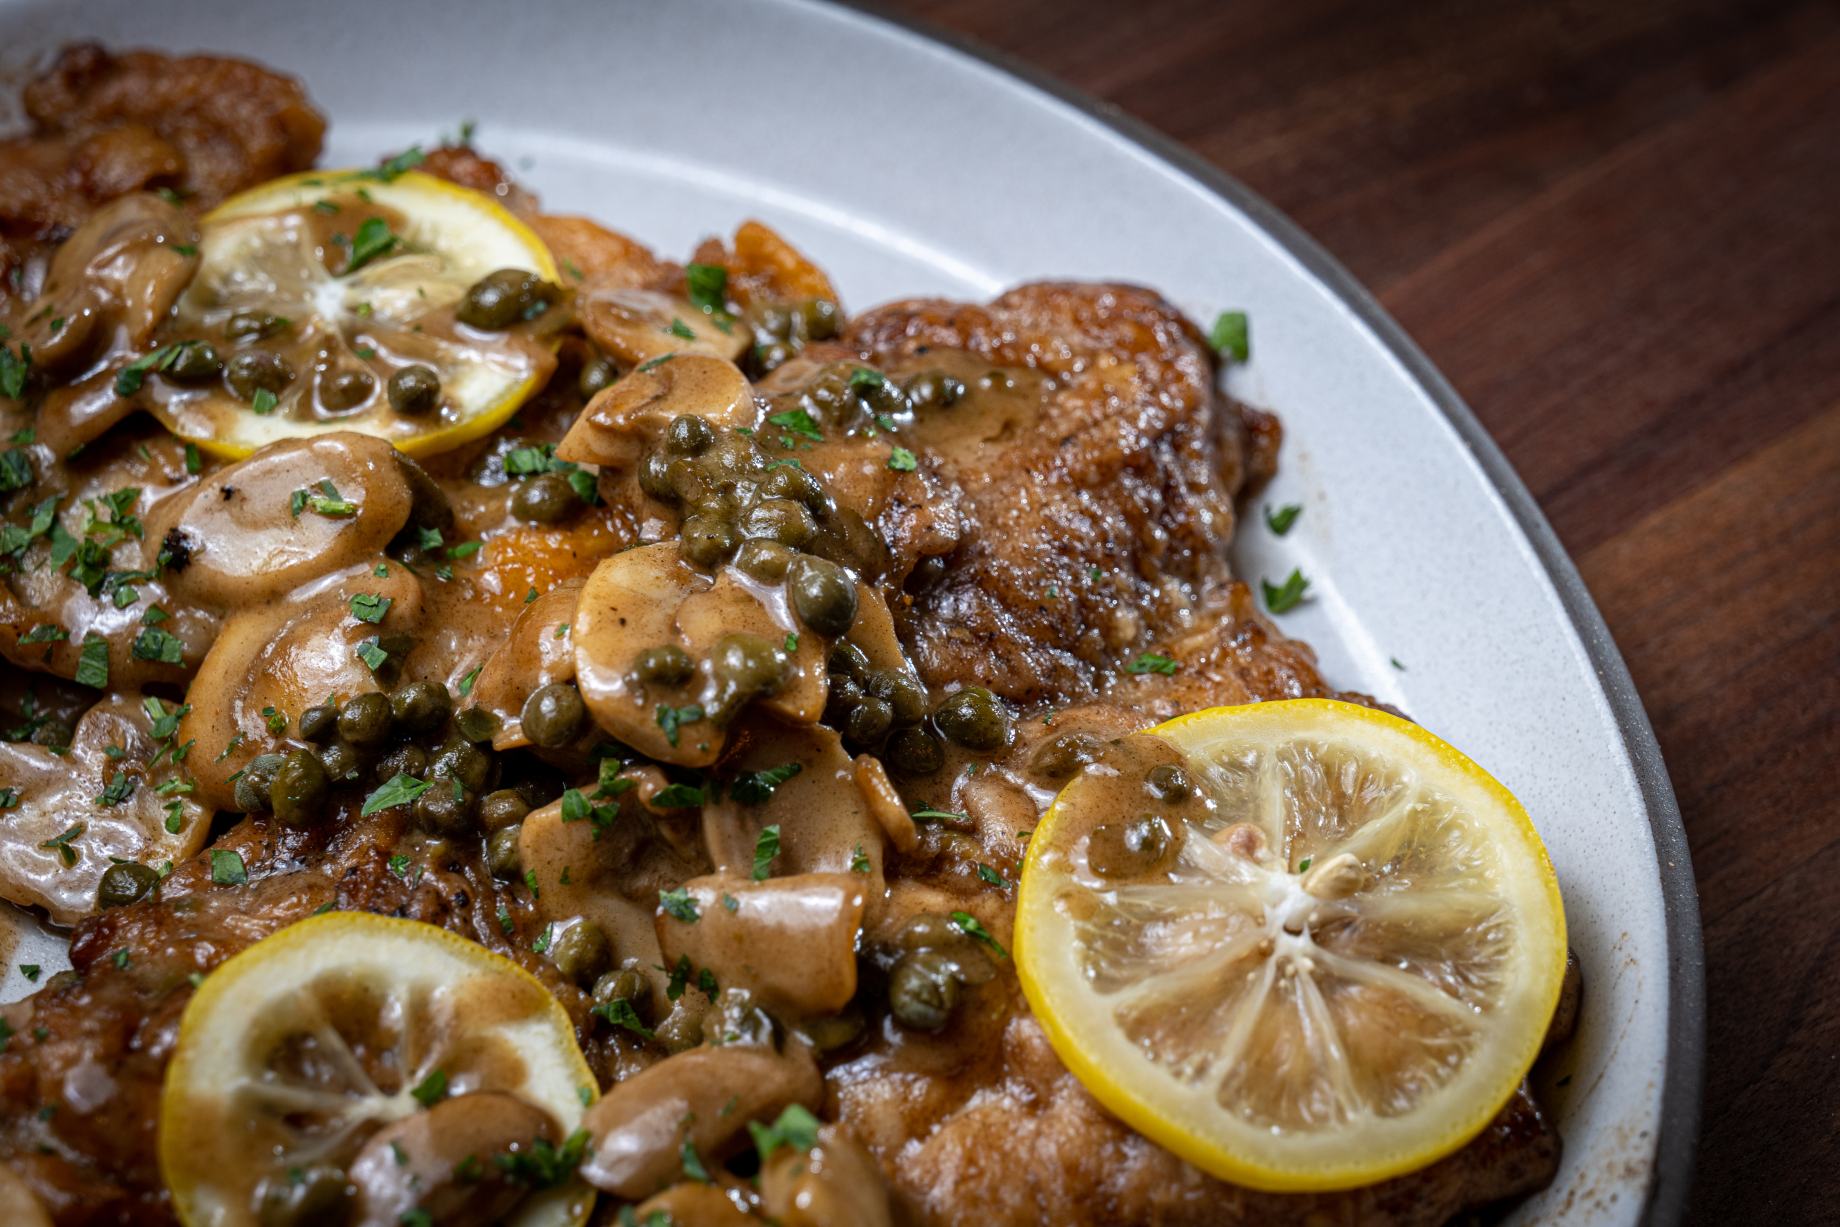 Good Eats chicken piccata on a white platter garnished with lemon slices.